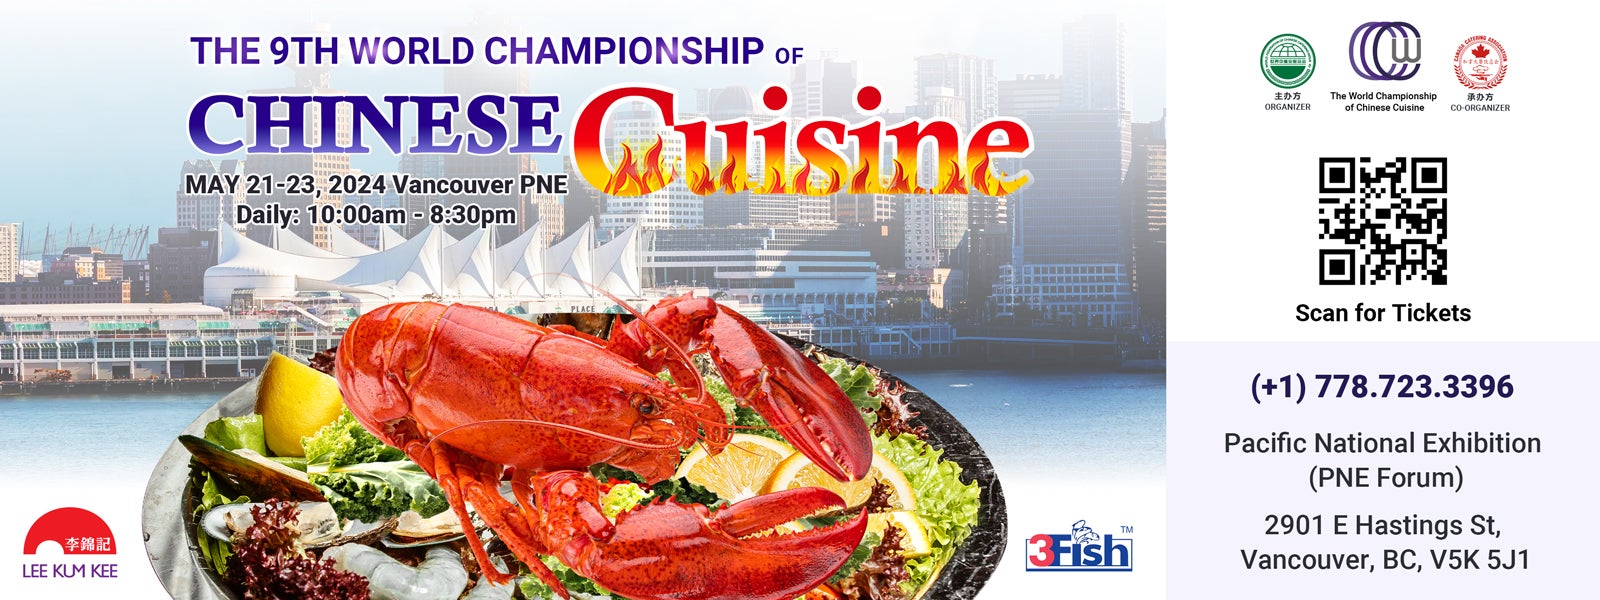 The World Championship of Chinese Cuisine 2024